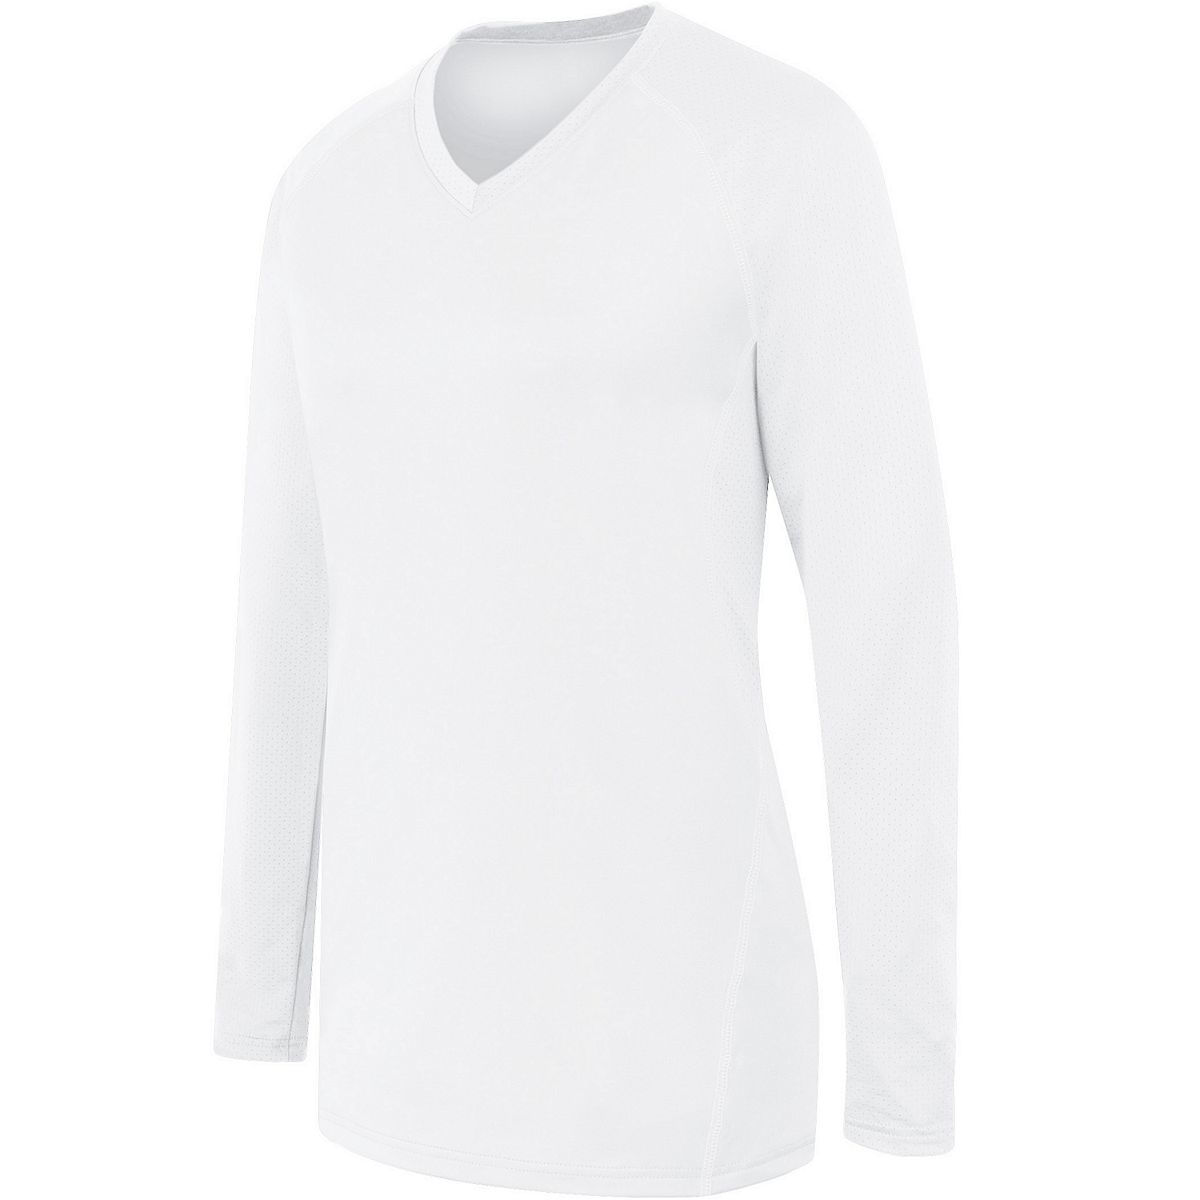 High 5 Ladies Long Sleeve Solid Jersey in White/White  -Part of the Ladies, Ladies-Jersey, High5-Products, Volleyball, Shirts product lines at KanaleyCreations.com